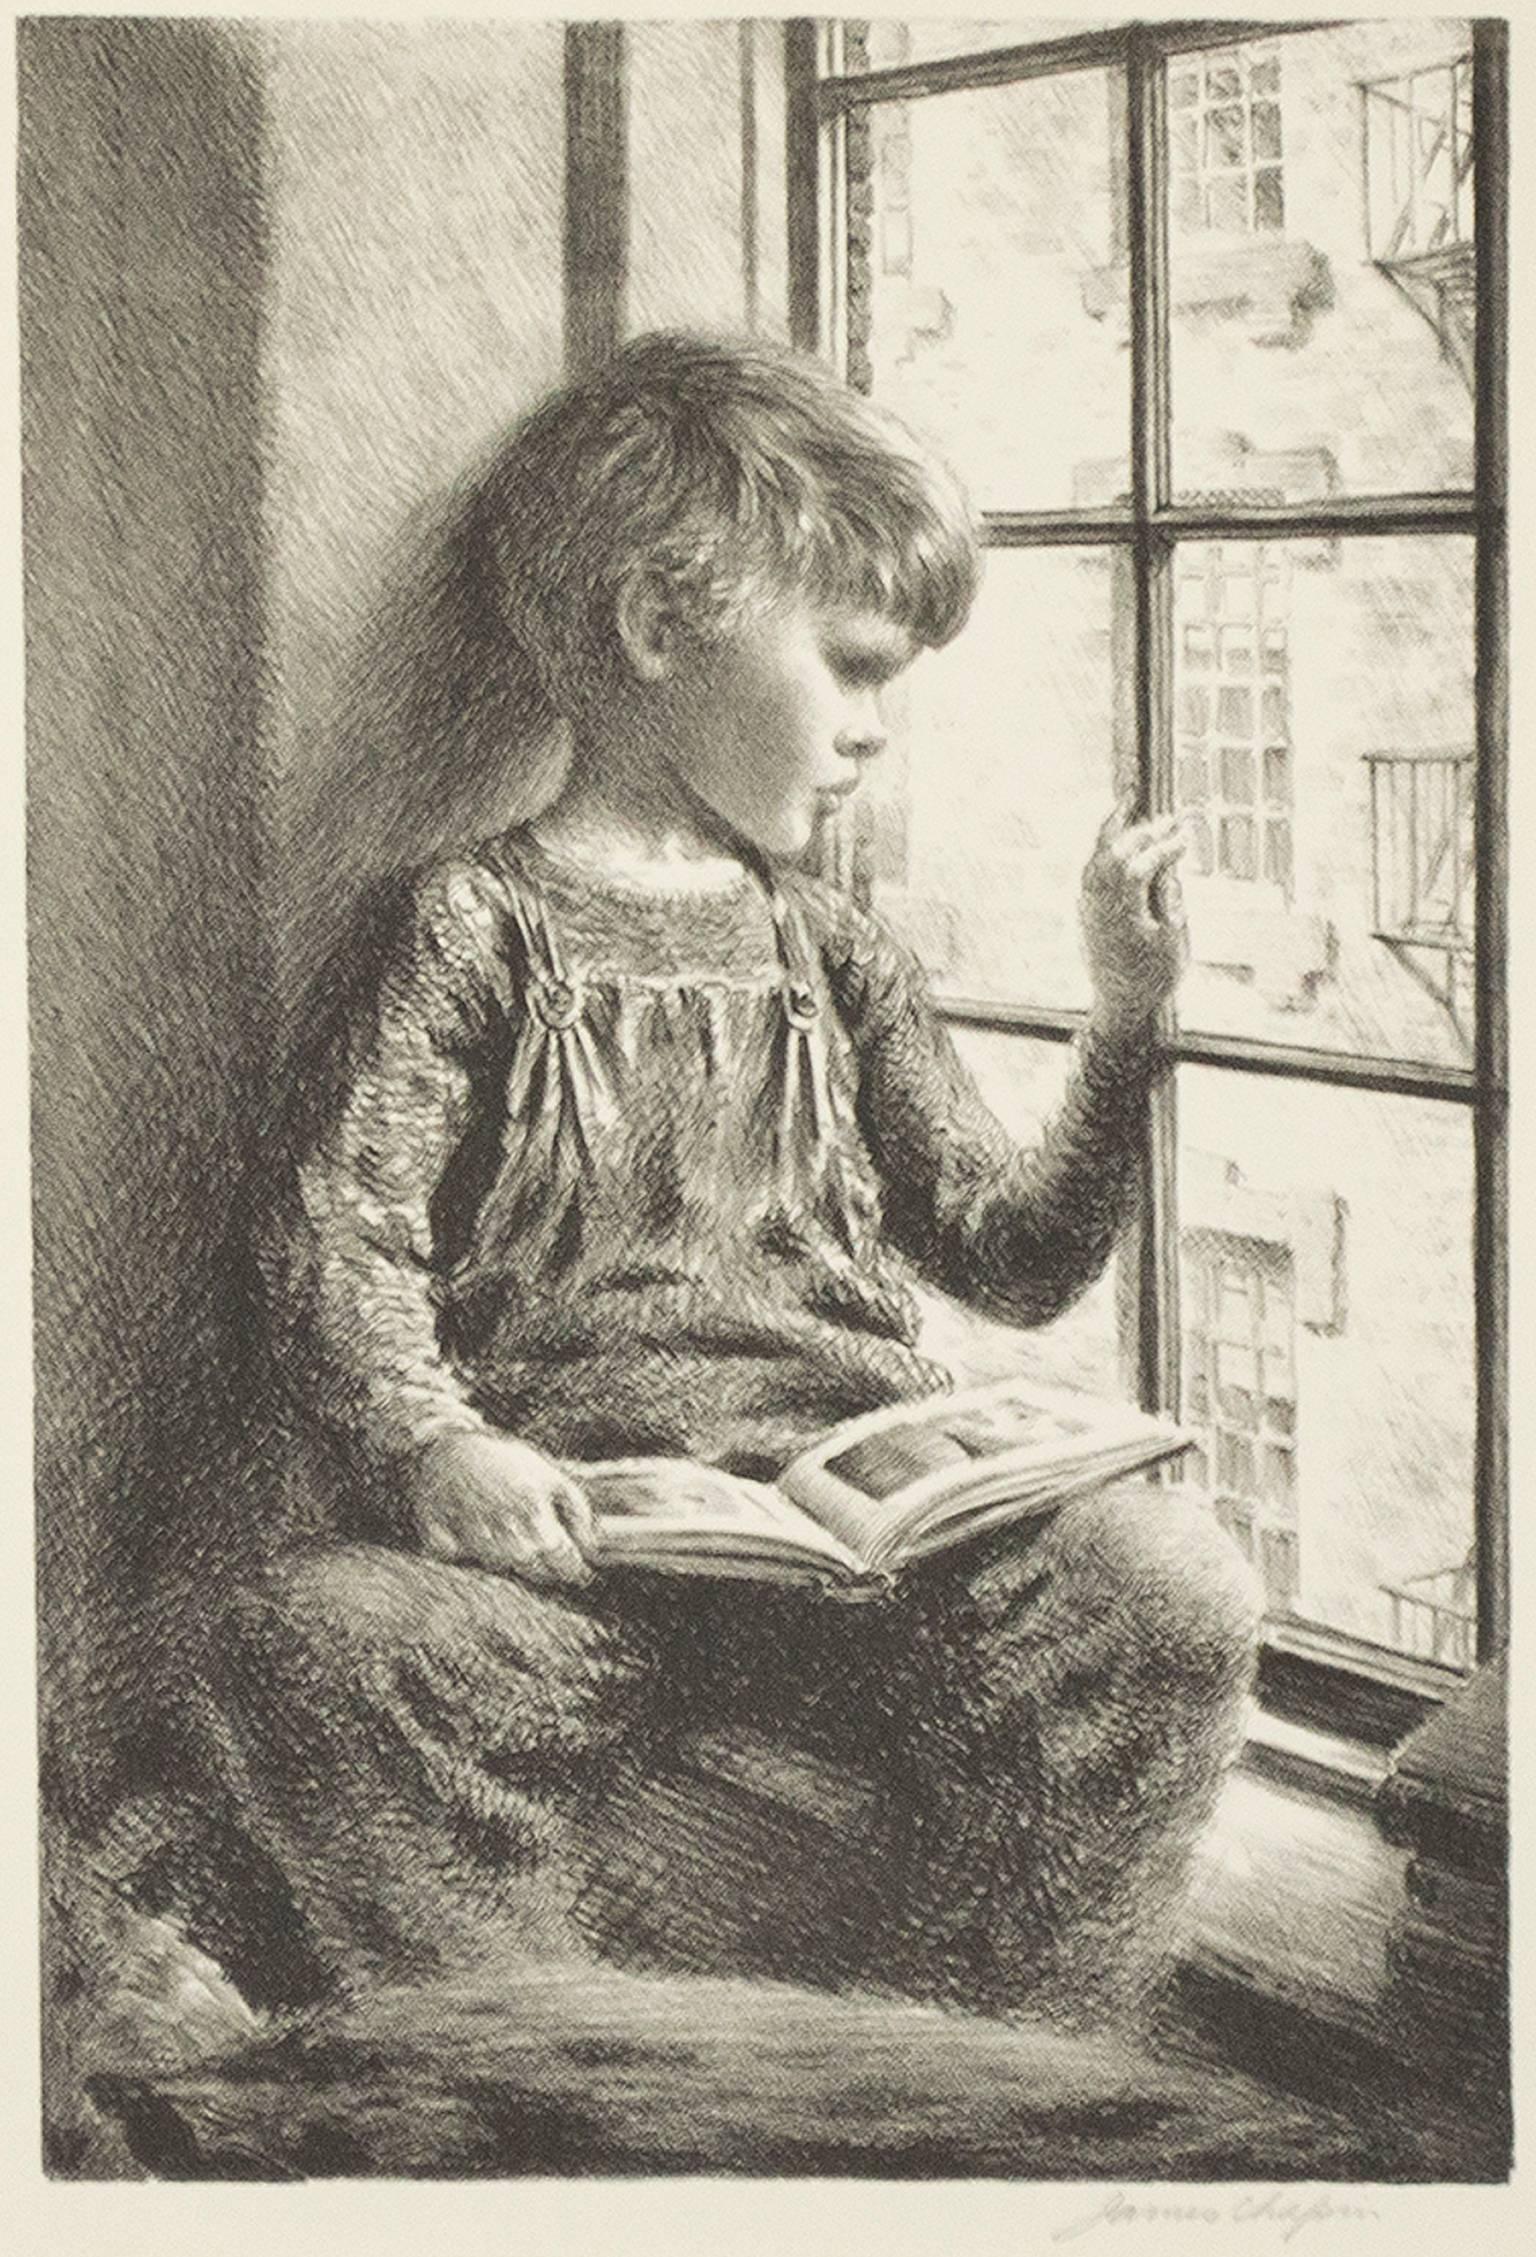 James Ormsbee Chapin Figurative Print - "Boy With Book Looking Out Window, " Original Lithograph print classic gift 